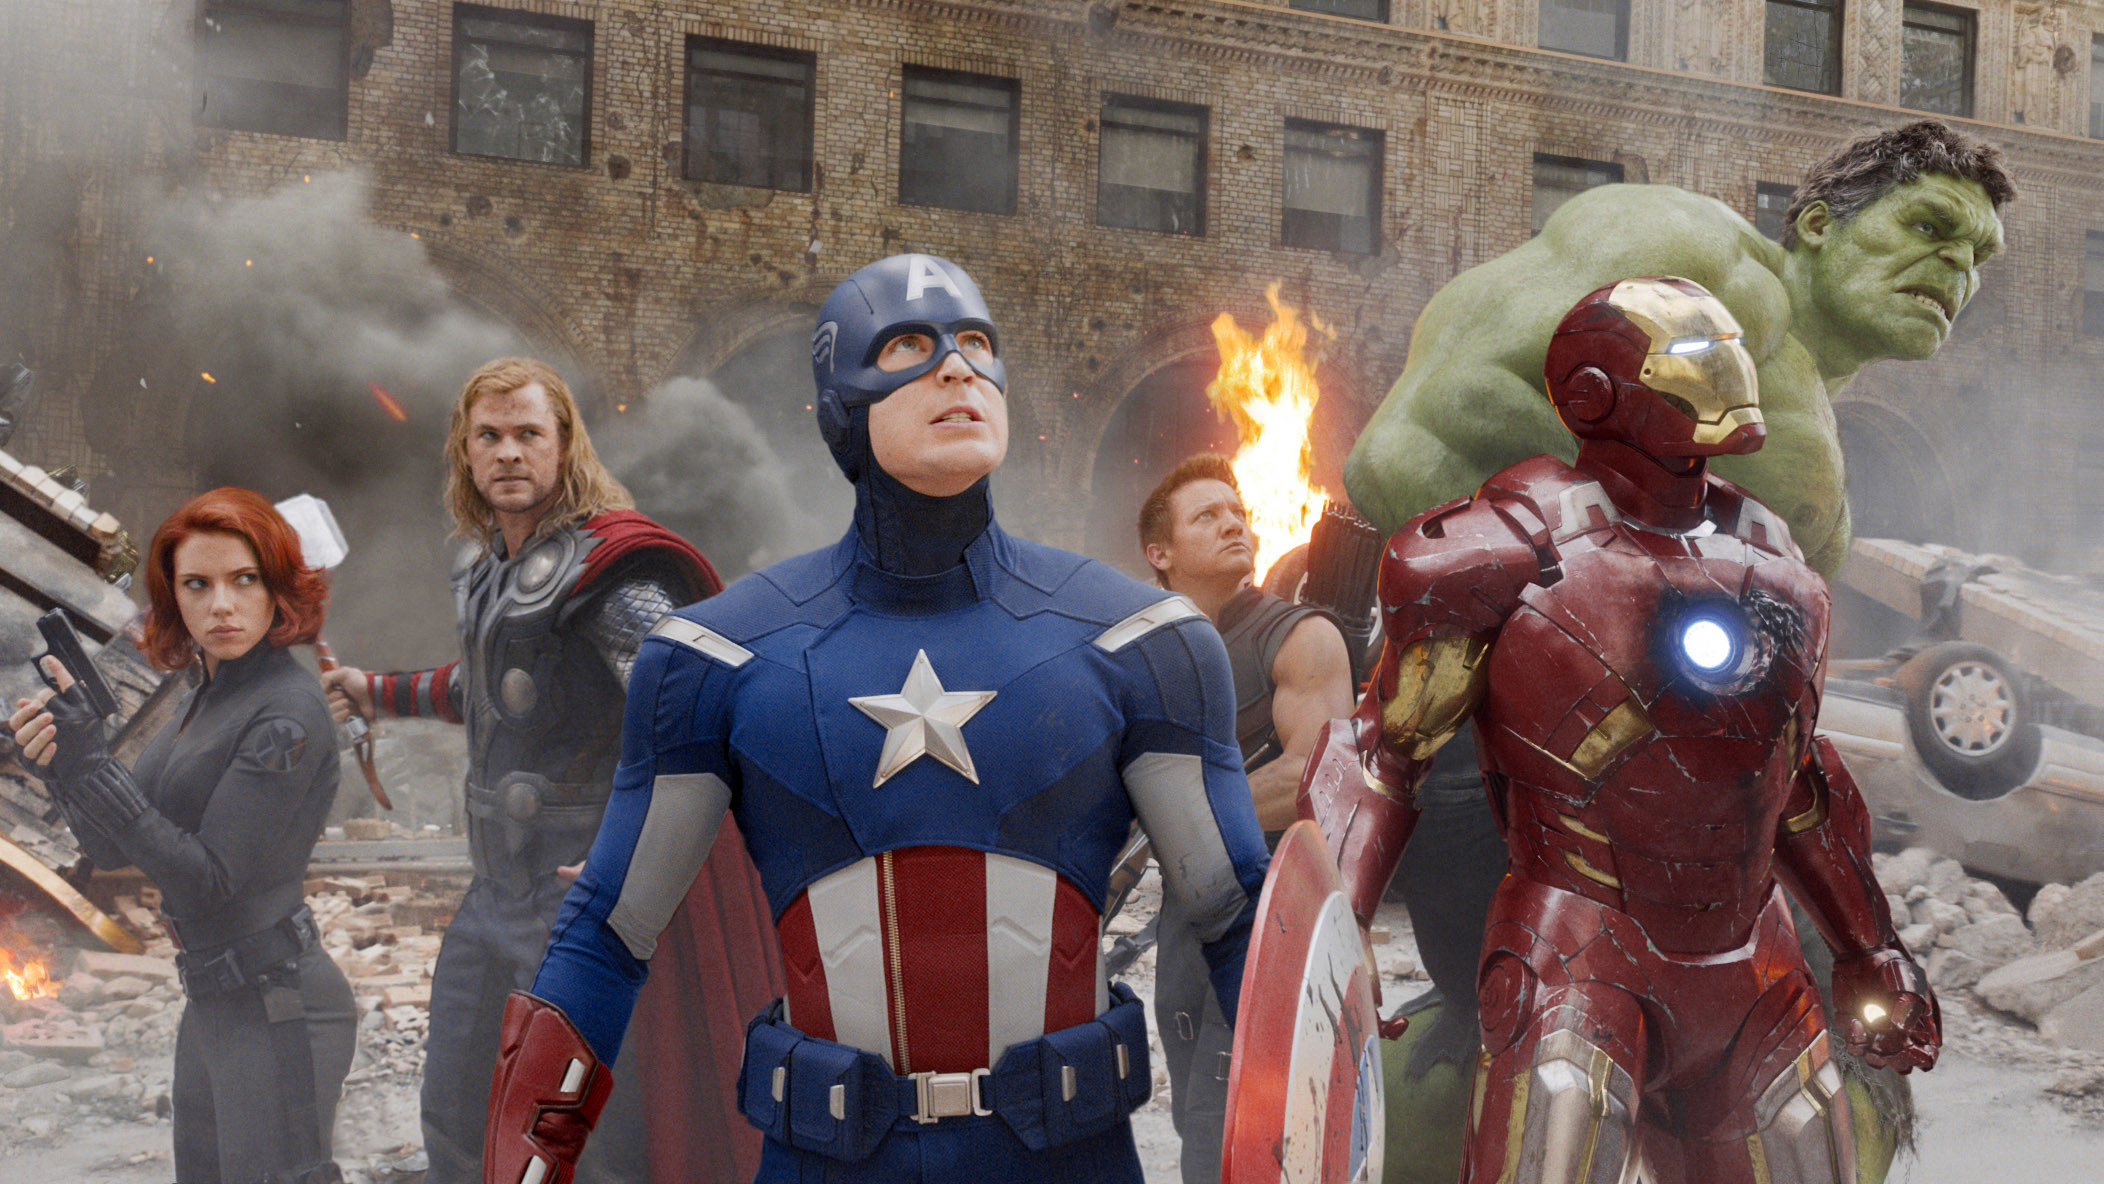 The Avengers assembled in New York City